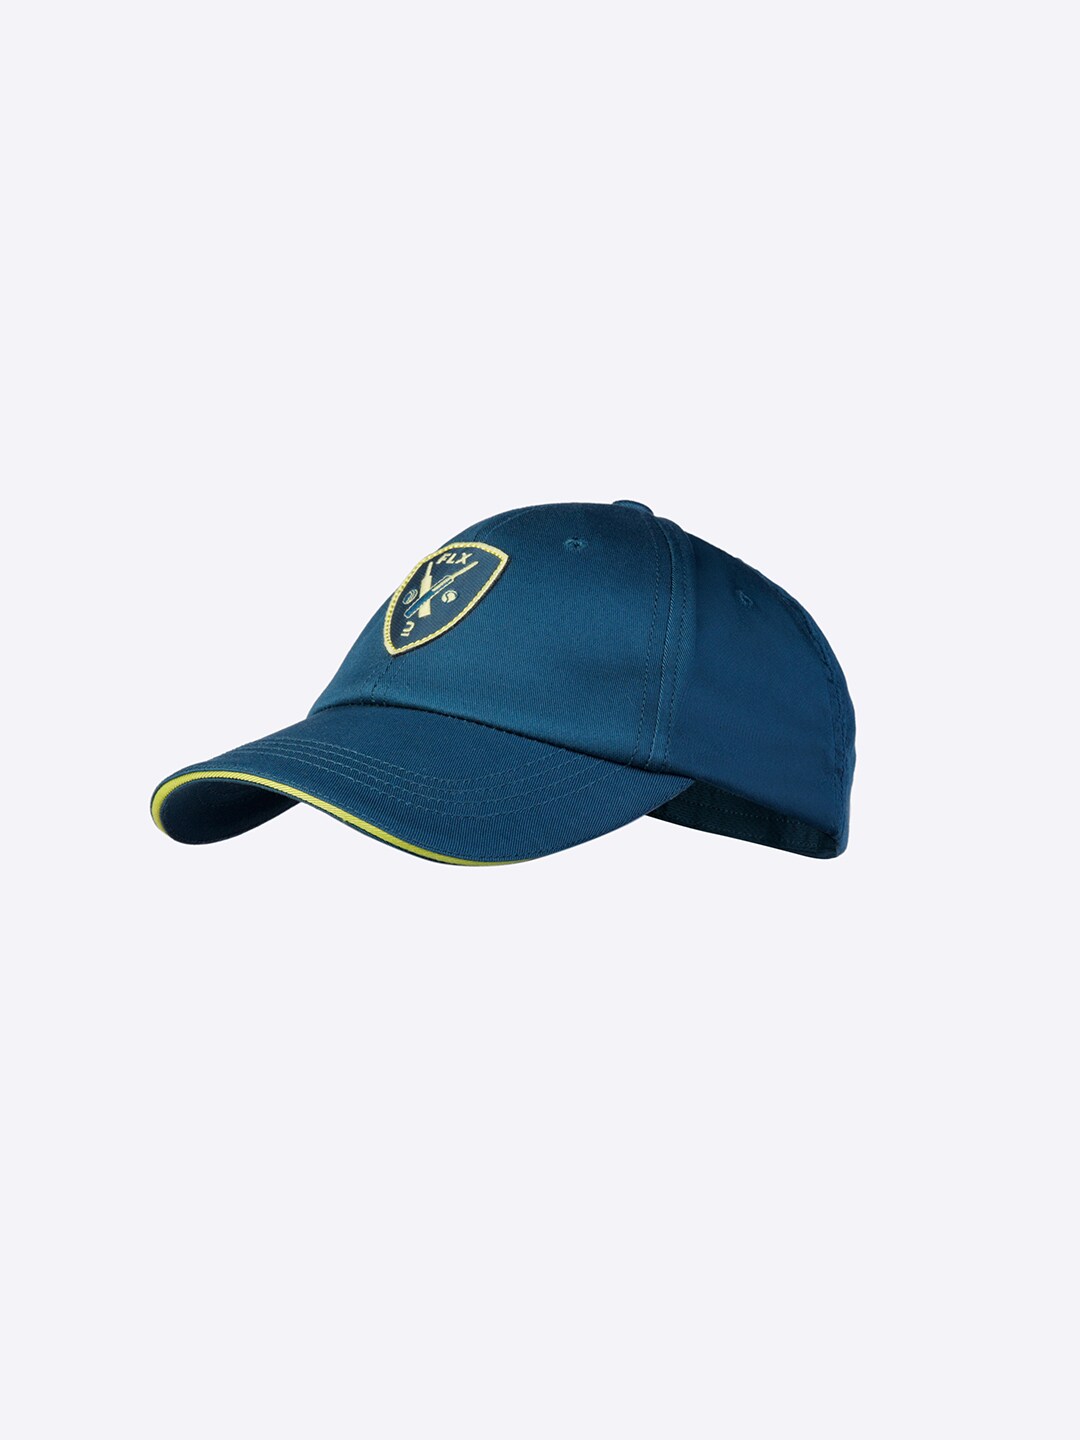 FLX By Decathlon Unisex Blue Quick Dry UV Protection Cricket Cap 8652757 Price in India